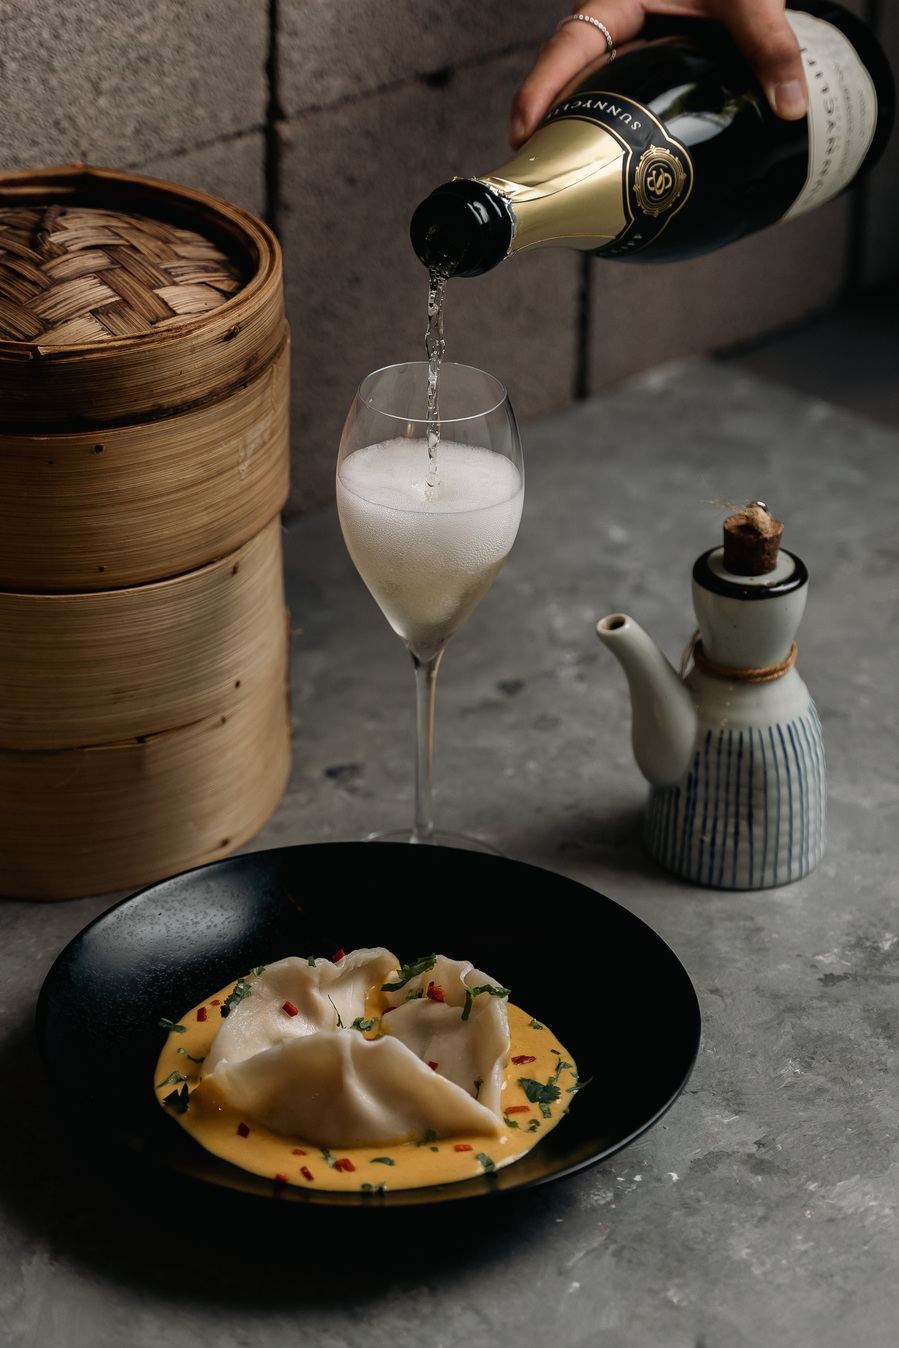 dumplings on a plate and a hand pouring champagne onto a glass